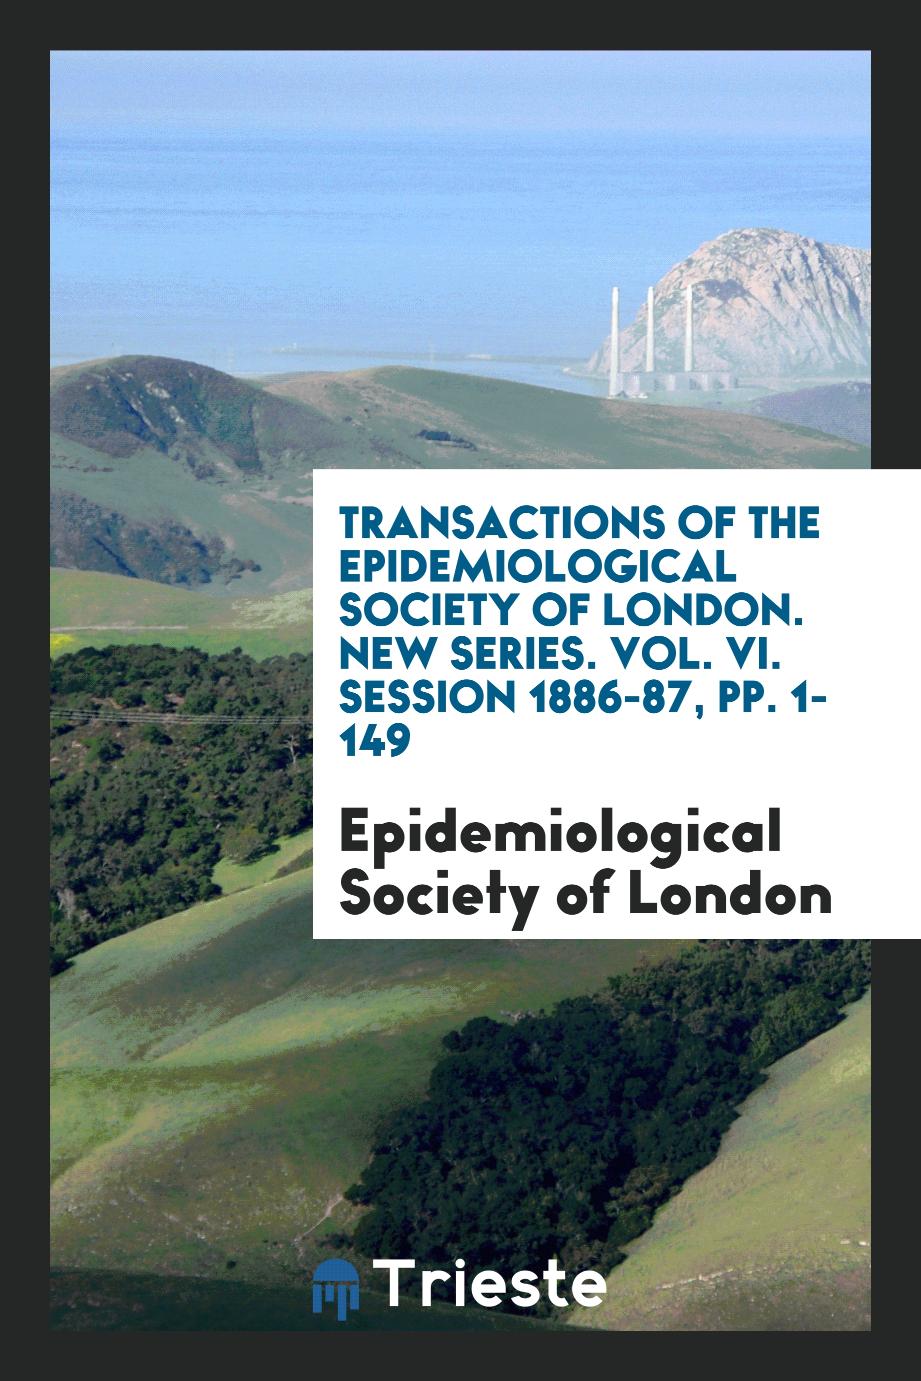 Transactions of the Epidemiological Society of London. New Series. Vol. VI. Session 1886-87, pp. 1-149